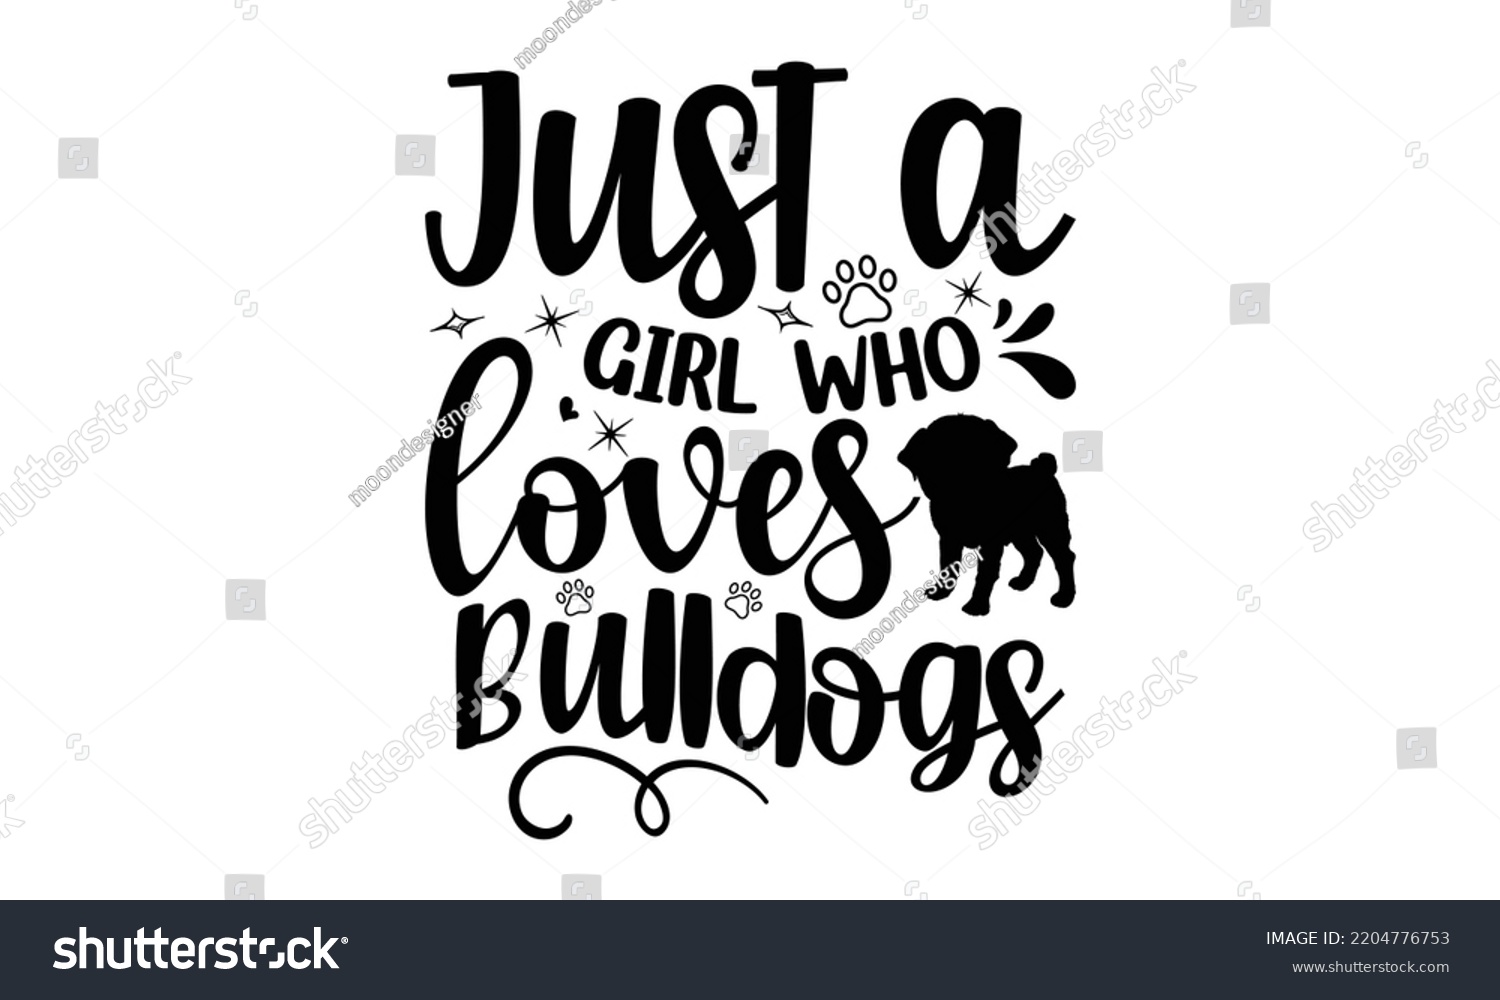 SVG of Just a girl who loves bulldogs- Bullodog T-shirt and SVG Design,  Dog lover t shirt design gift for women, typography design, can you download this Design, svg Files for Cutting and Silhouette EPS, 10 svg